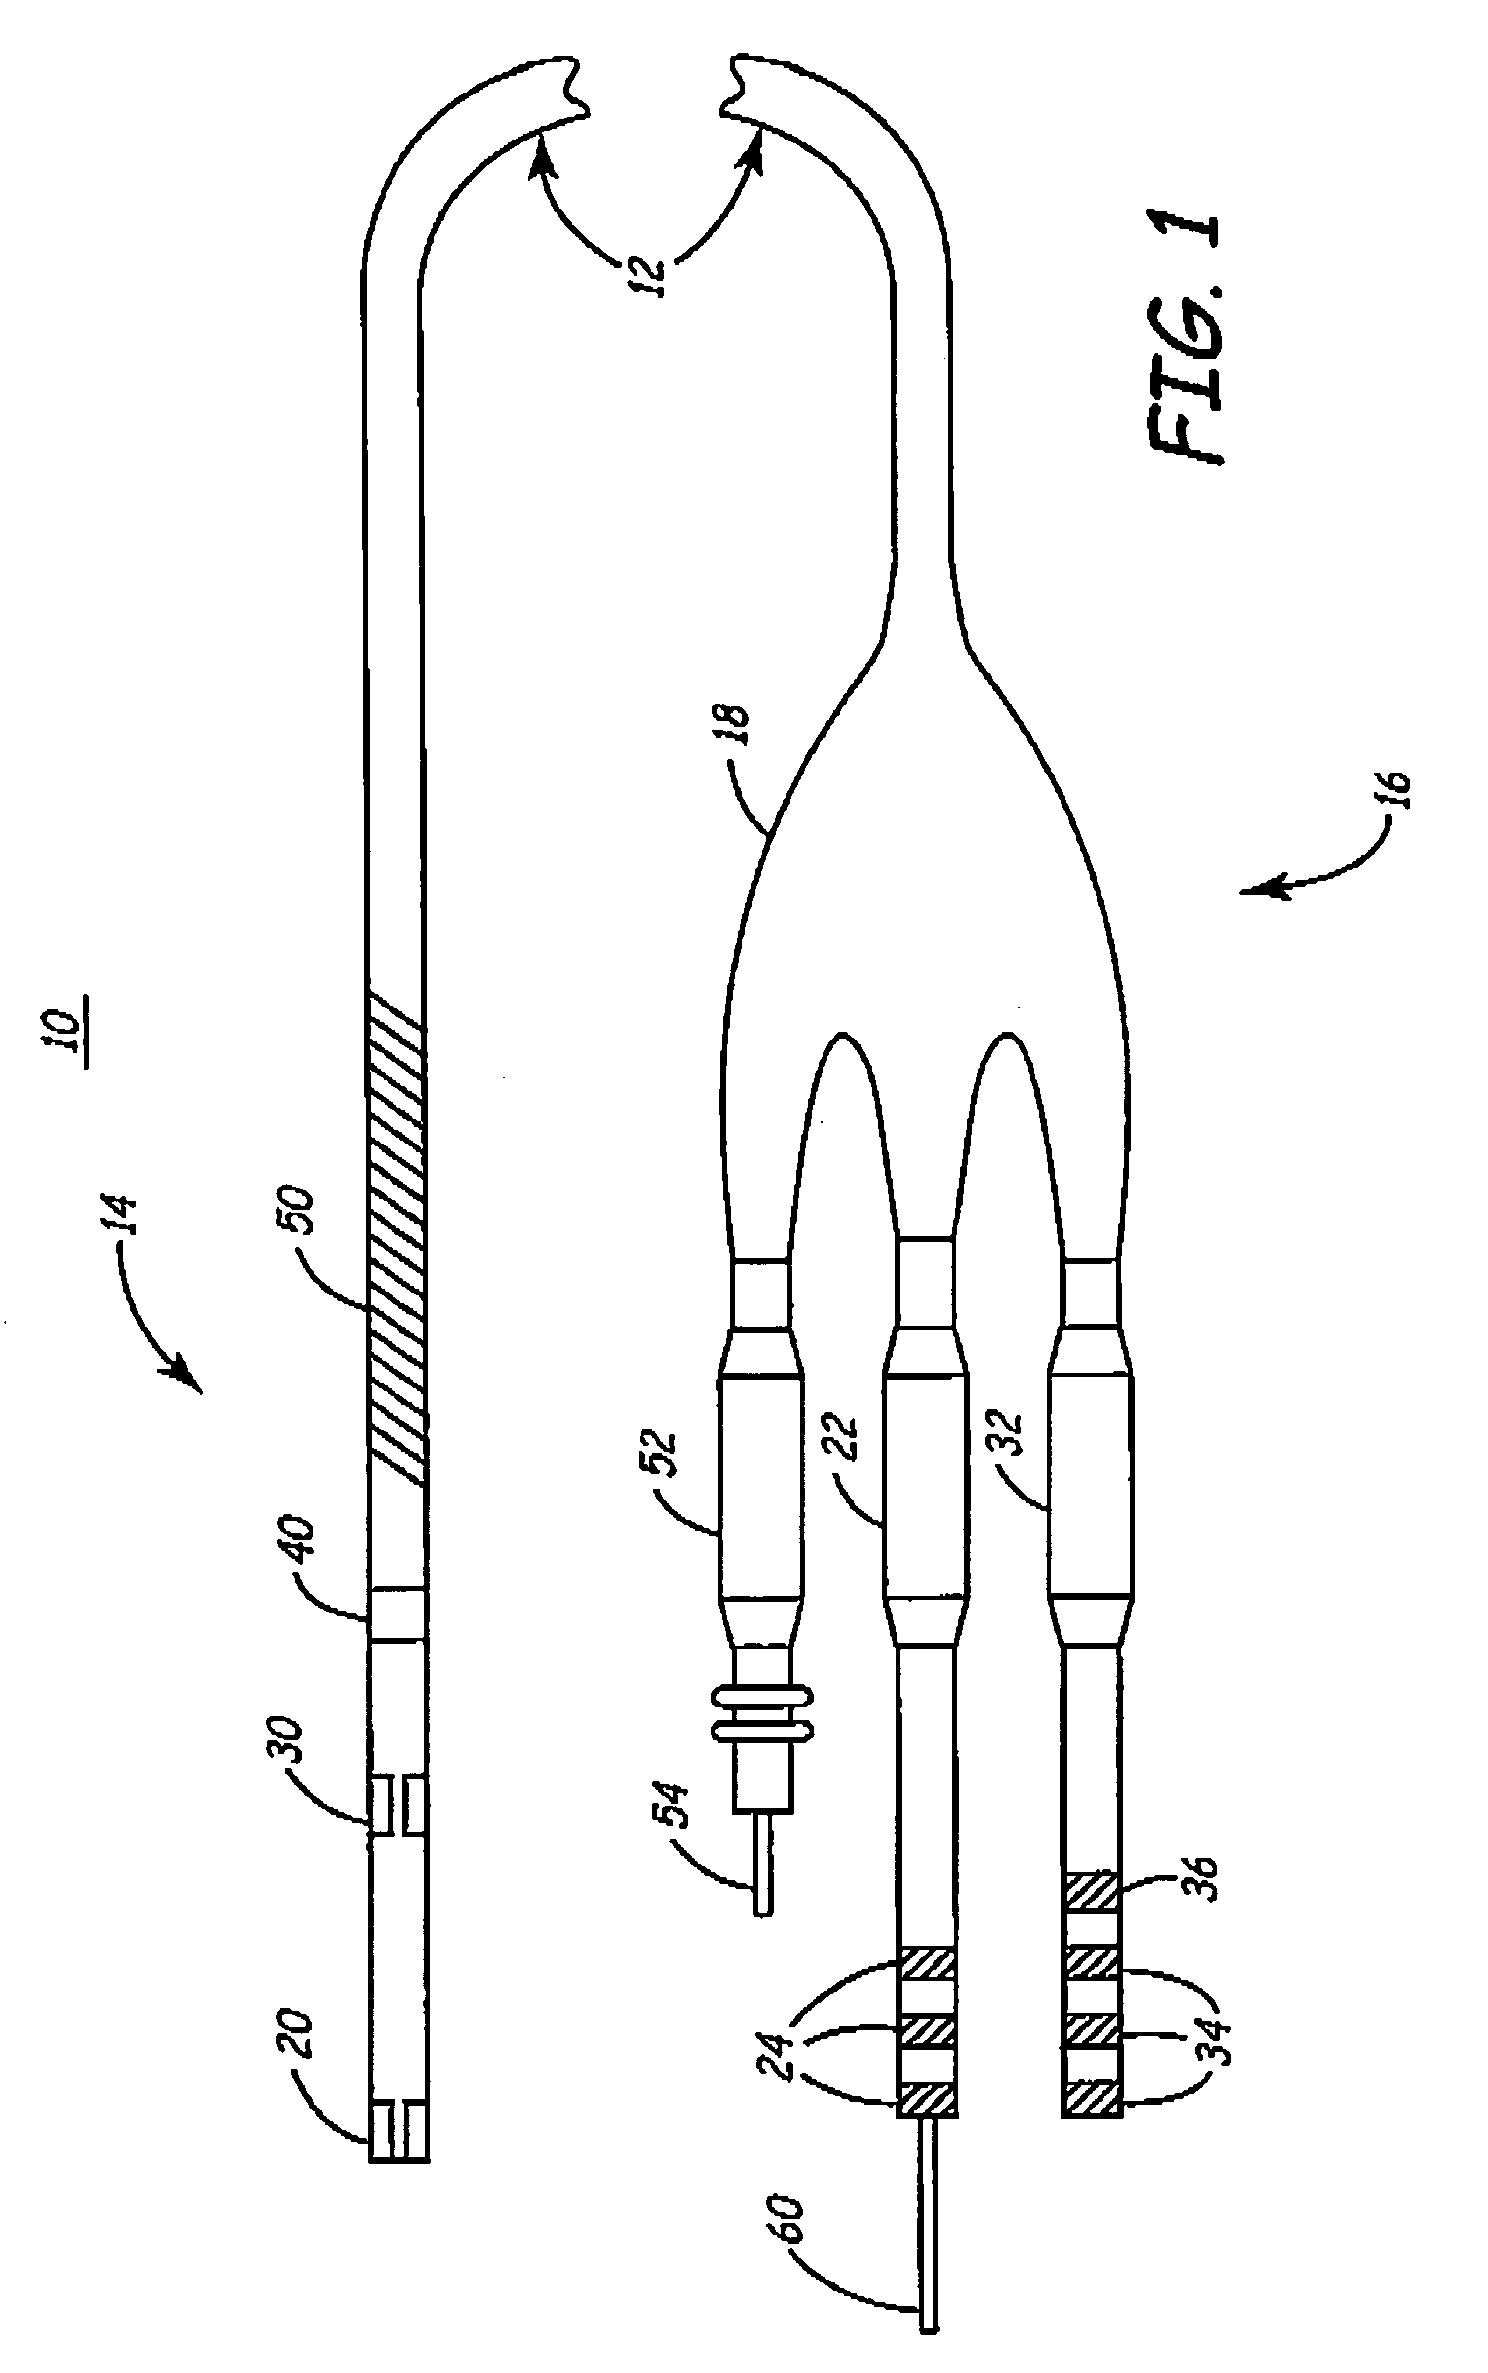 Method and apparatus for selecting an optimal electrode configuration of a medical electrical lead having a multiple electrode array